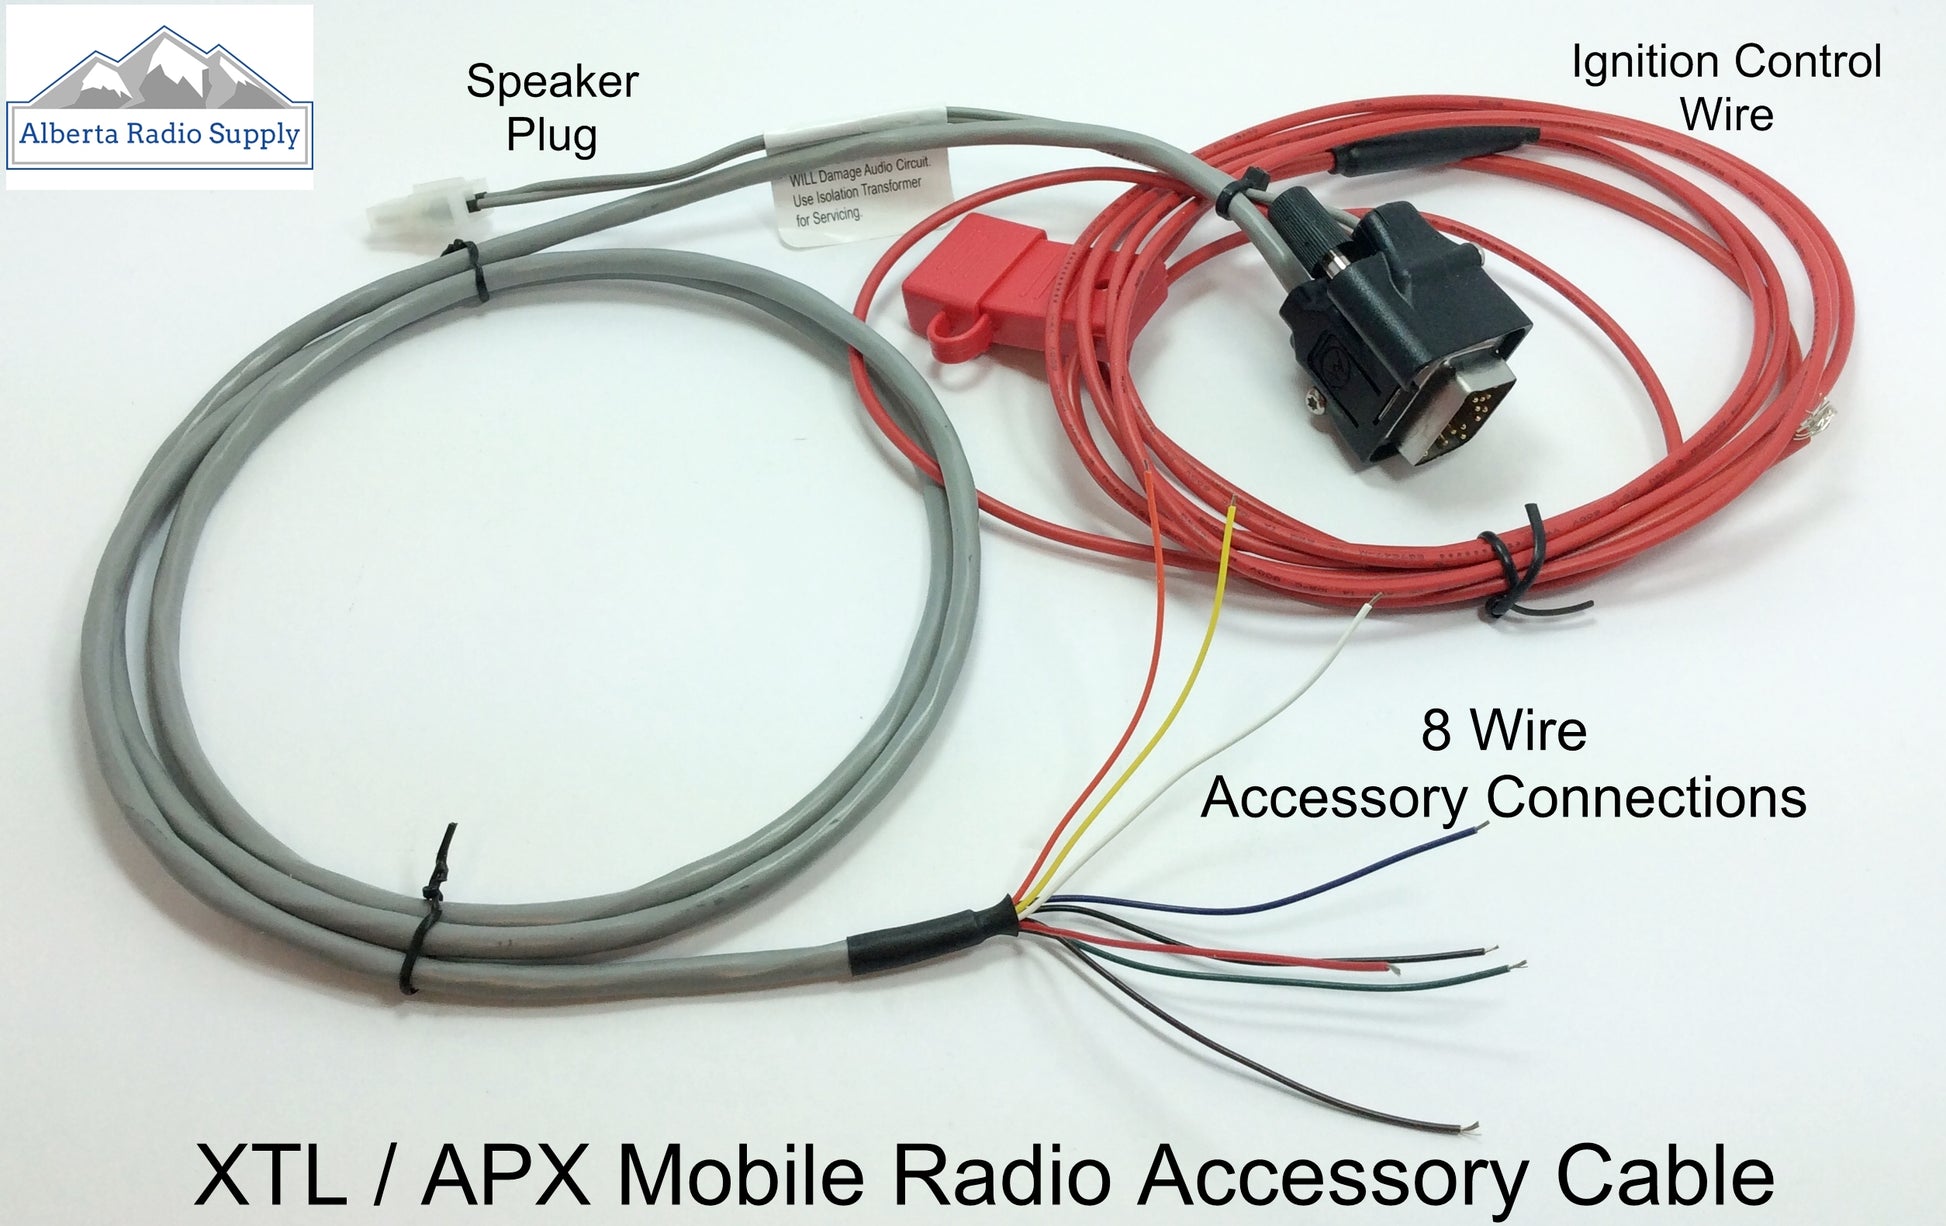 Accessory Cable For Motorola XTL or APX Mobile Radios XTL1500 XTL2500 XTL5000 APX1500 APX4500 APX6500 APX7500